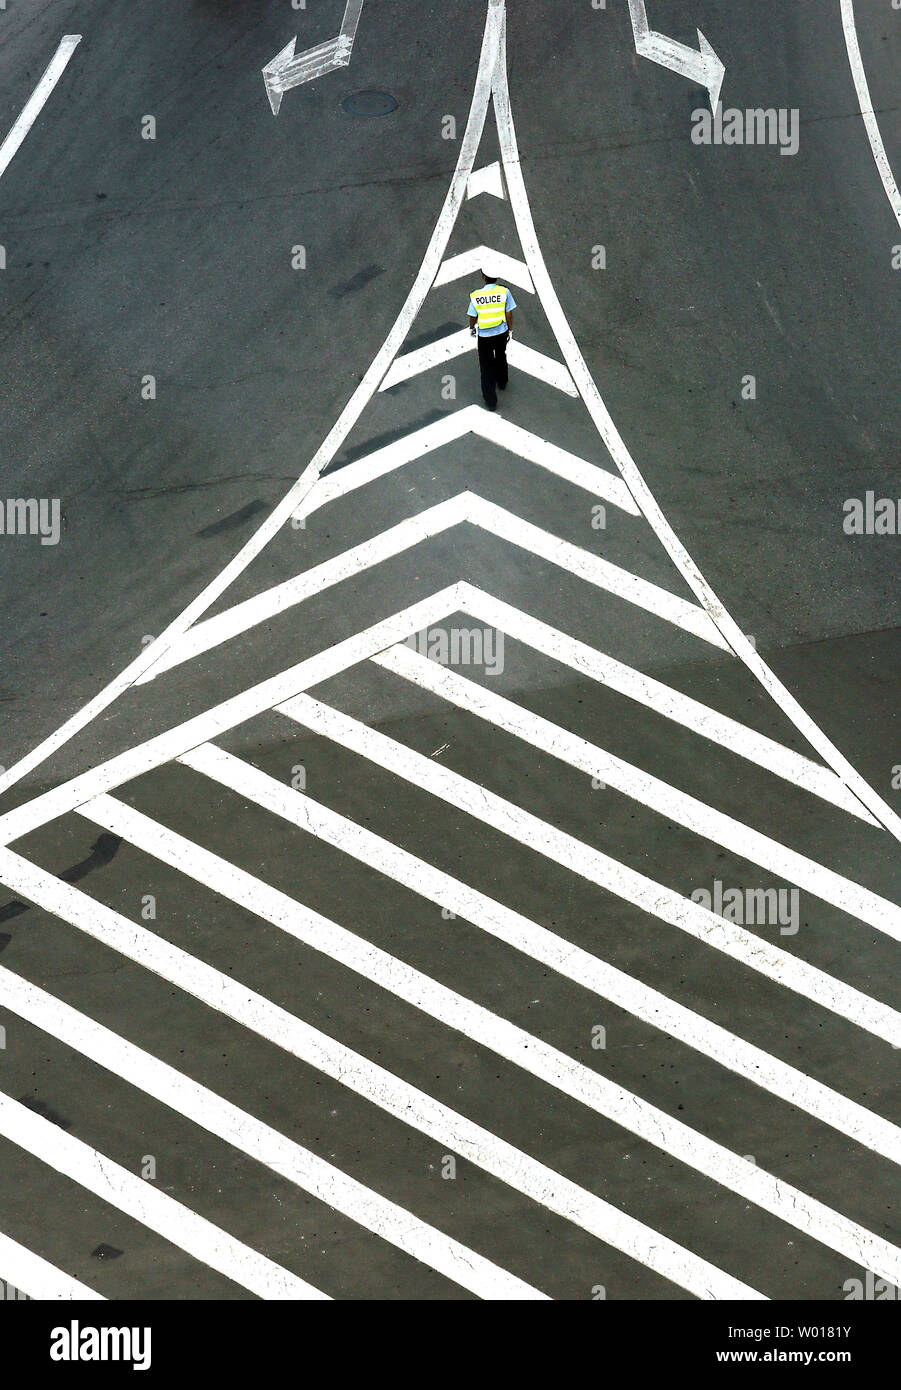 A Chinese policeman directs traffic in Dandong, China's largest border city with North Korea, in Liaoning Province, on May 30, 2015.  China remains North Korea's most important ally, providing Pyongyang with most of its food and energy supplies and comprises over sixty percent of its total trade volume.  North Korea's economic dependence on China continues to grow due to international sanctions, as indicated by the significant trade imbalance between the two countries.     Photo by Stephen Shaver/UPI Stock Photo